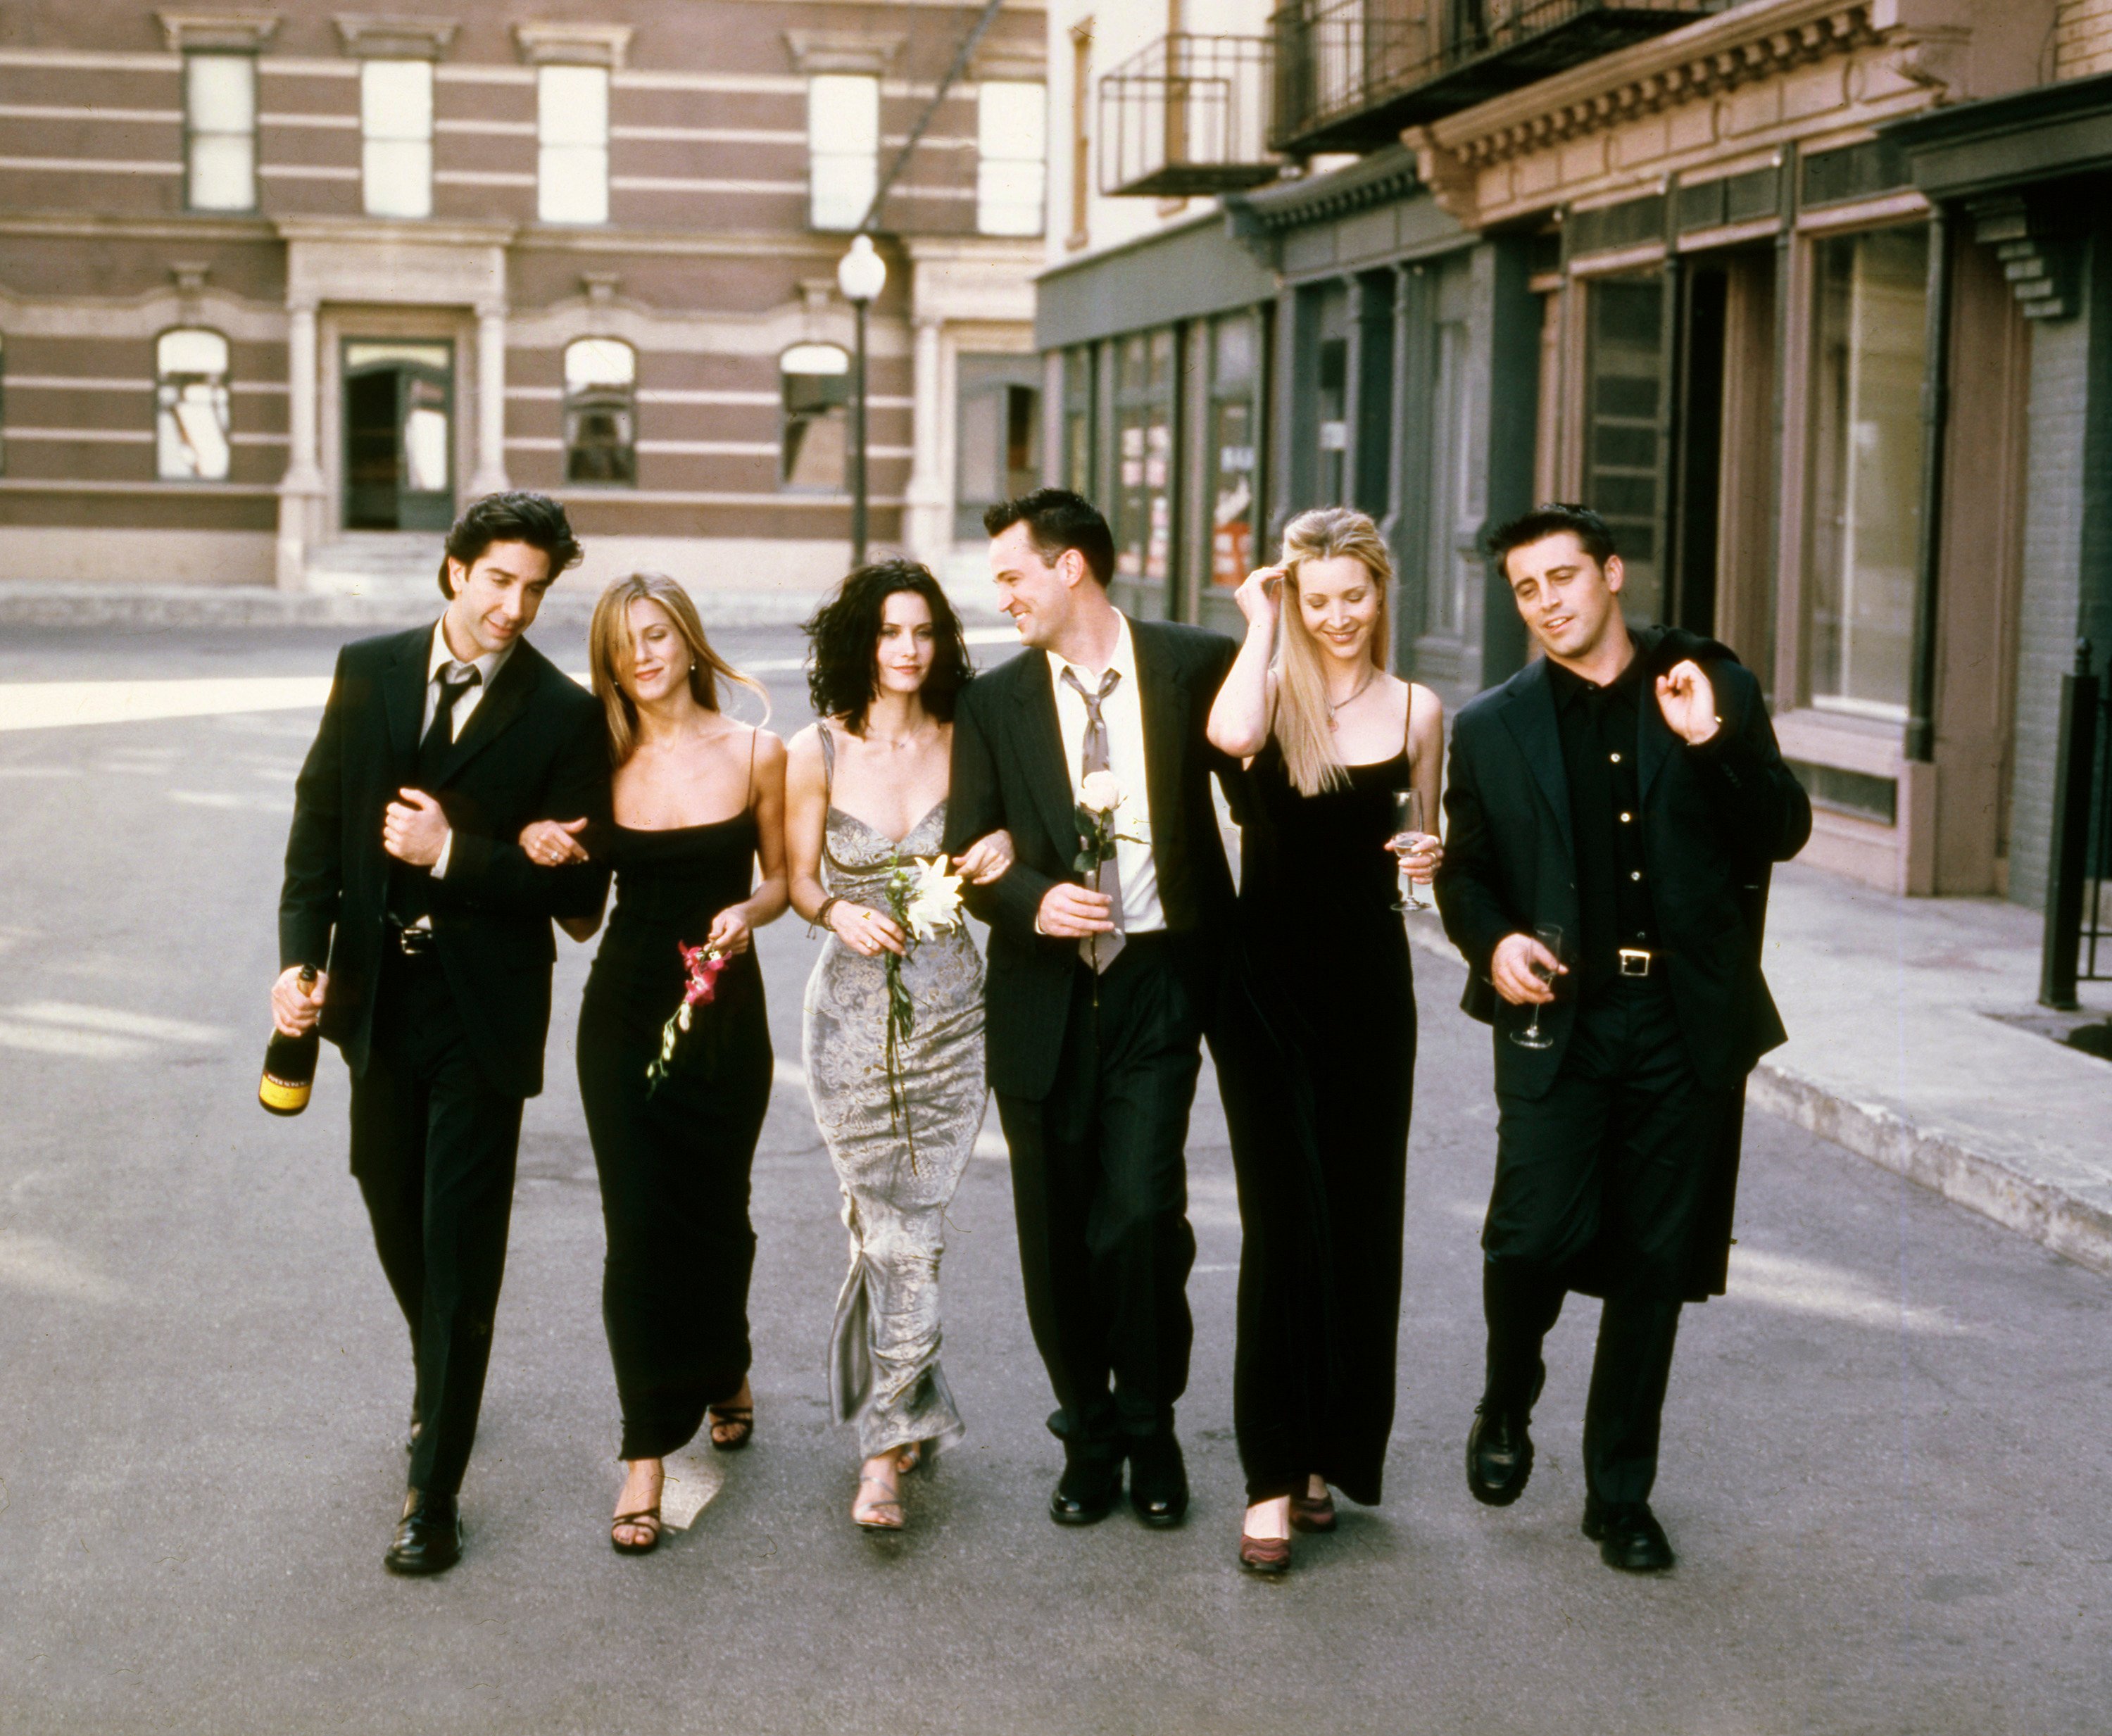 The cast of 'Friends' | NBCU Photo Bank/NBCUniversal via Getty Images via Getty Images